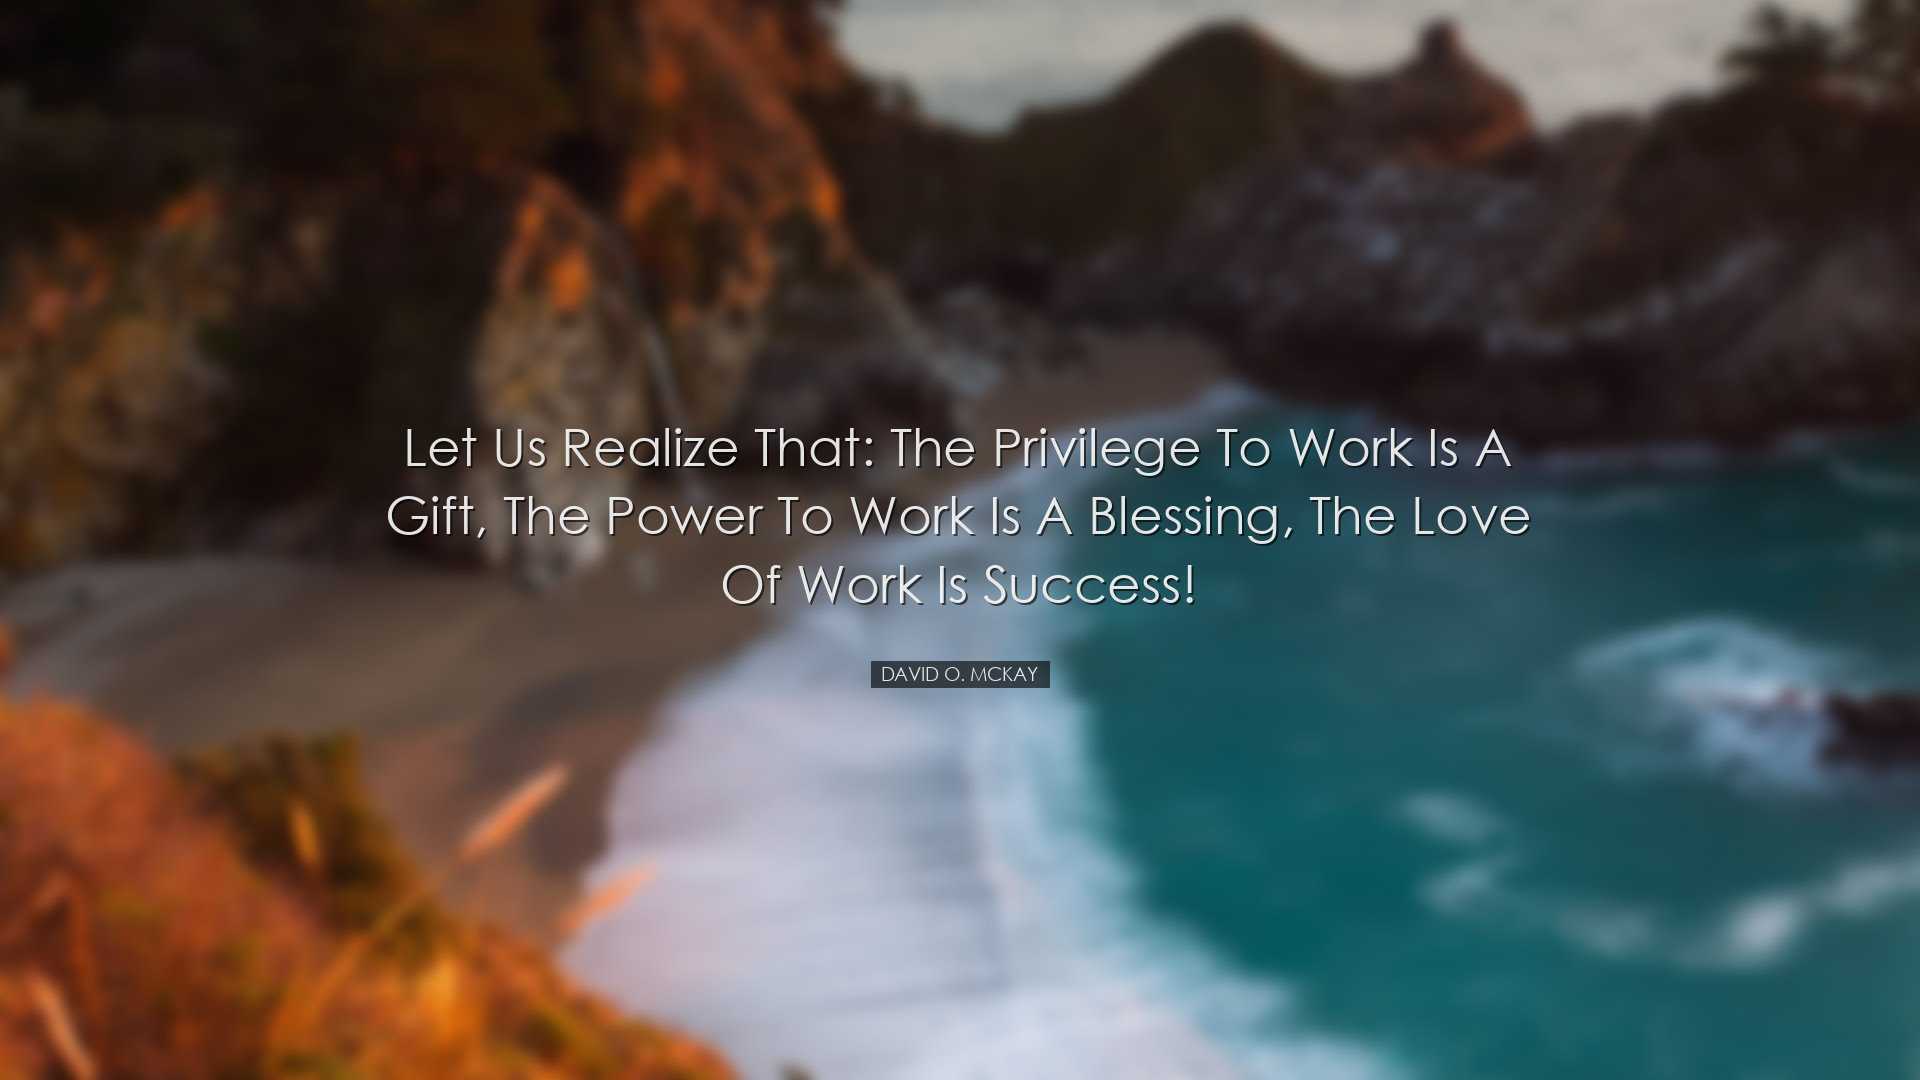 Let us realize that: the privilege to work is a gift, the power to